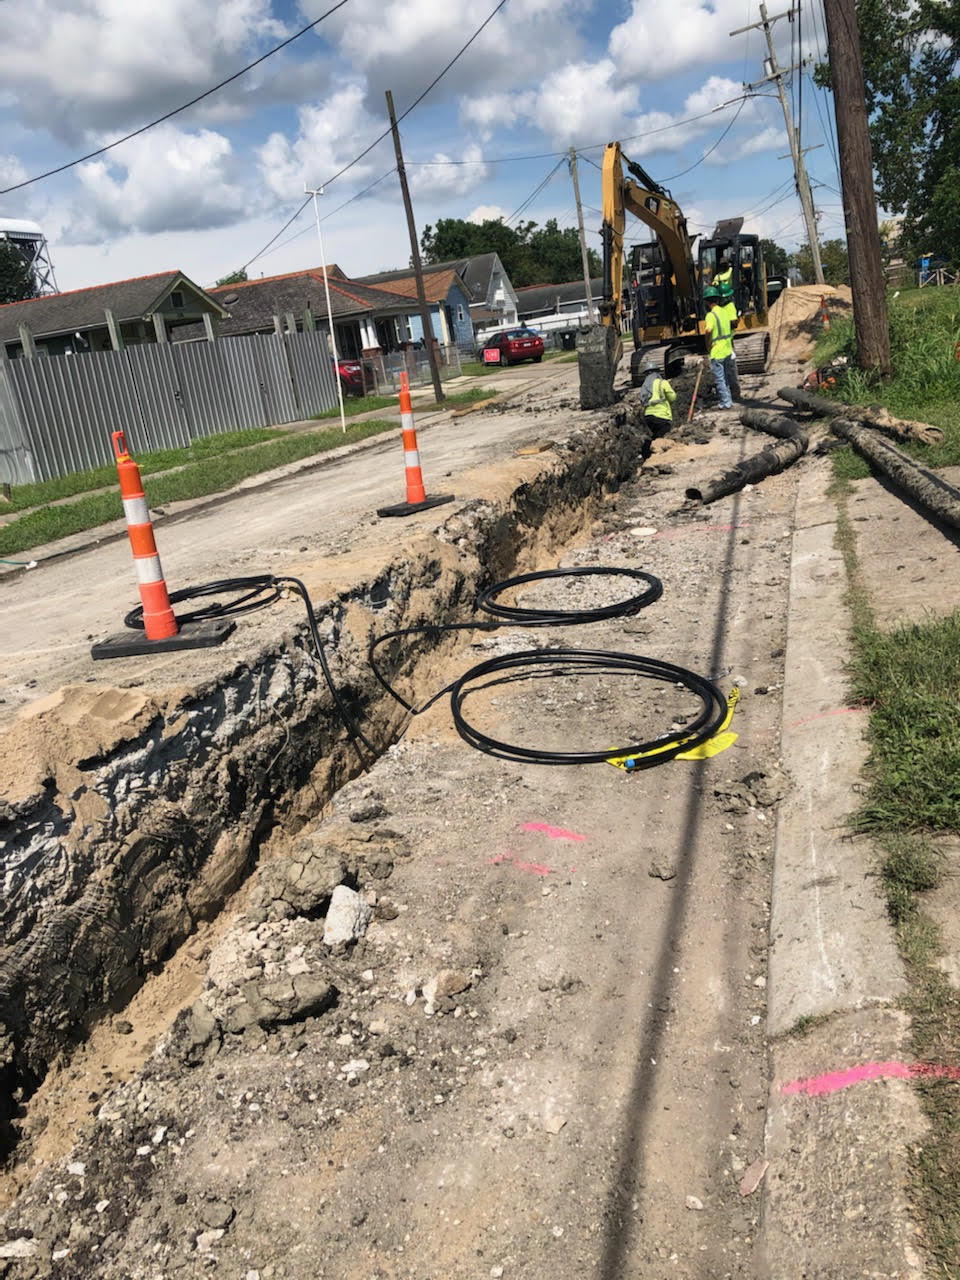 LOWER NINTH WARD SOUTH GROUP A BEGINS WITH THE PLACEMENT OF NEW WATER LINES